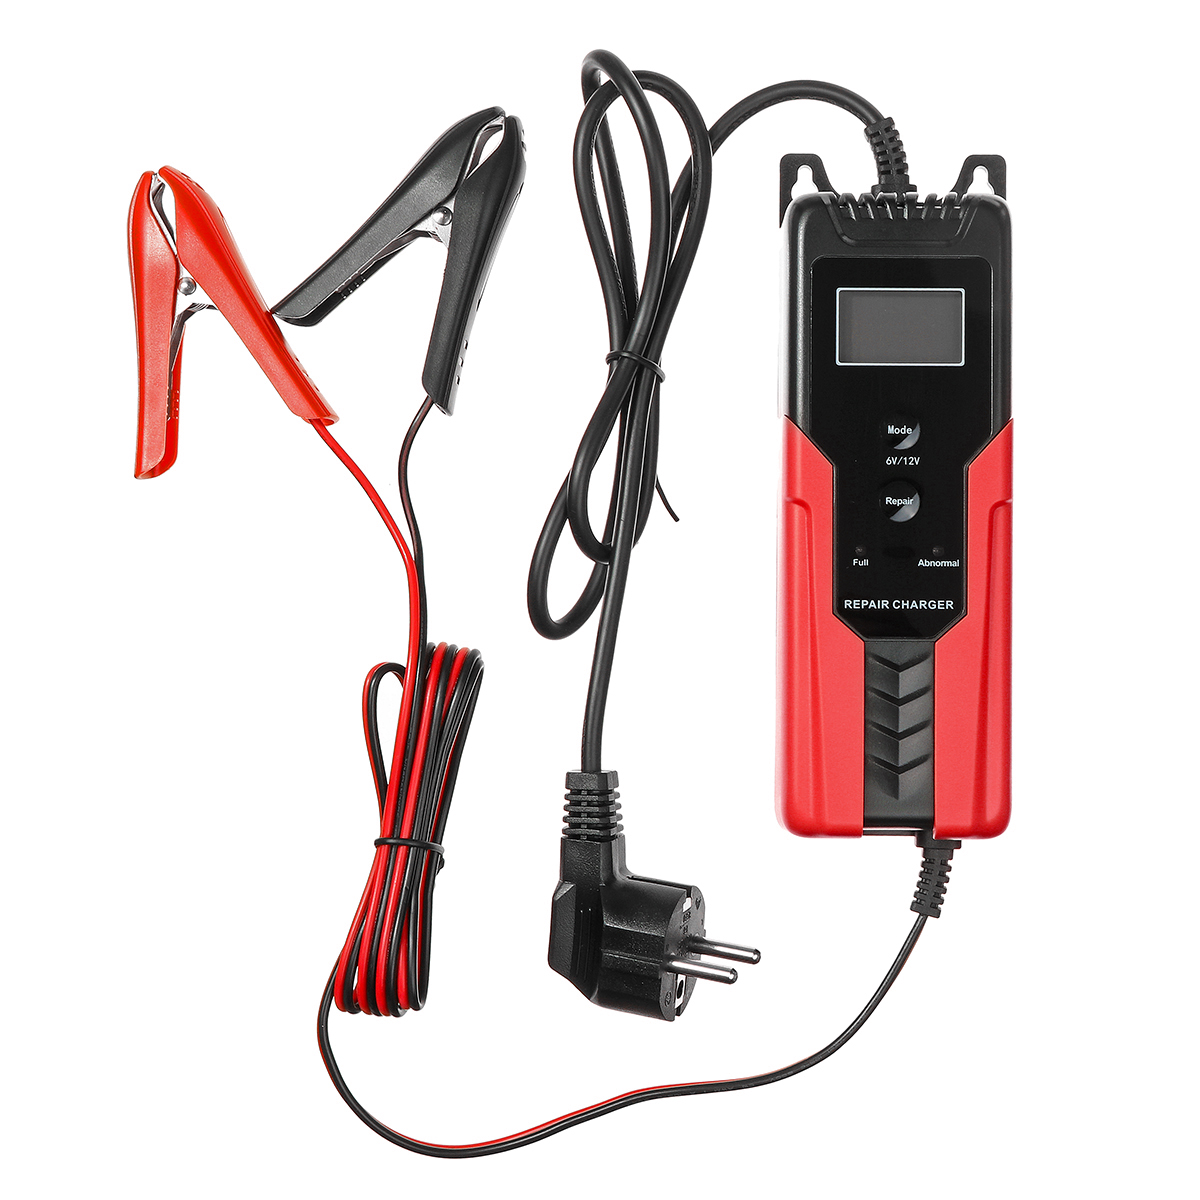 Intelligent LCD Display Battery Charger Automatic Pulse for 6V/12V Lead-Acid for Car Motorycle Boat